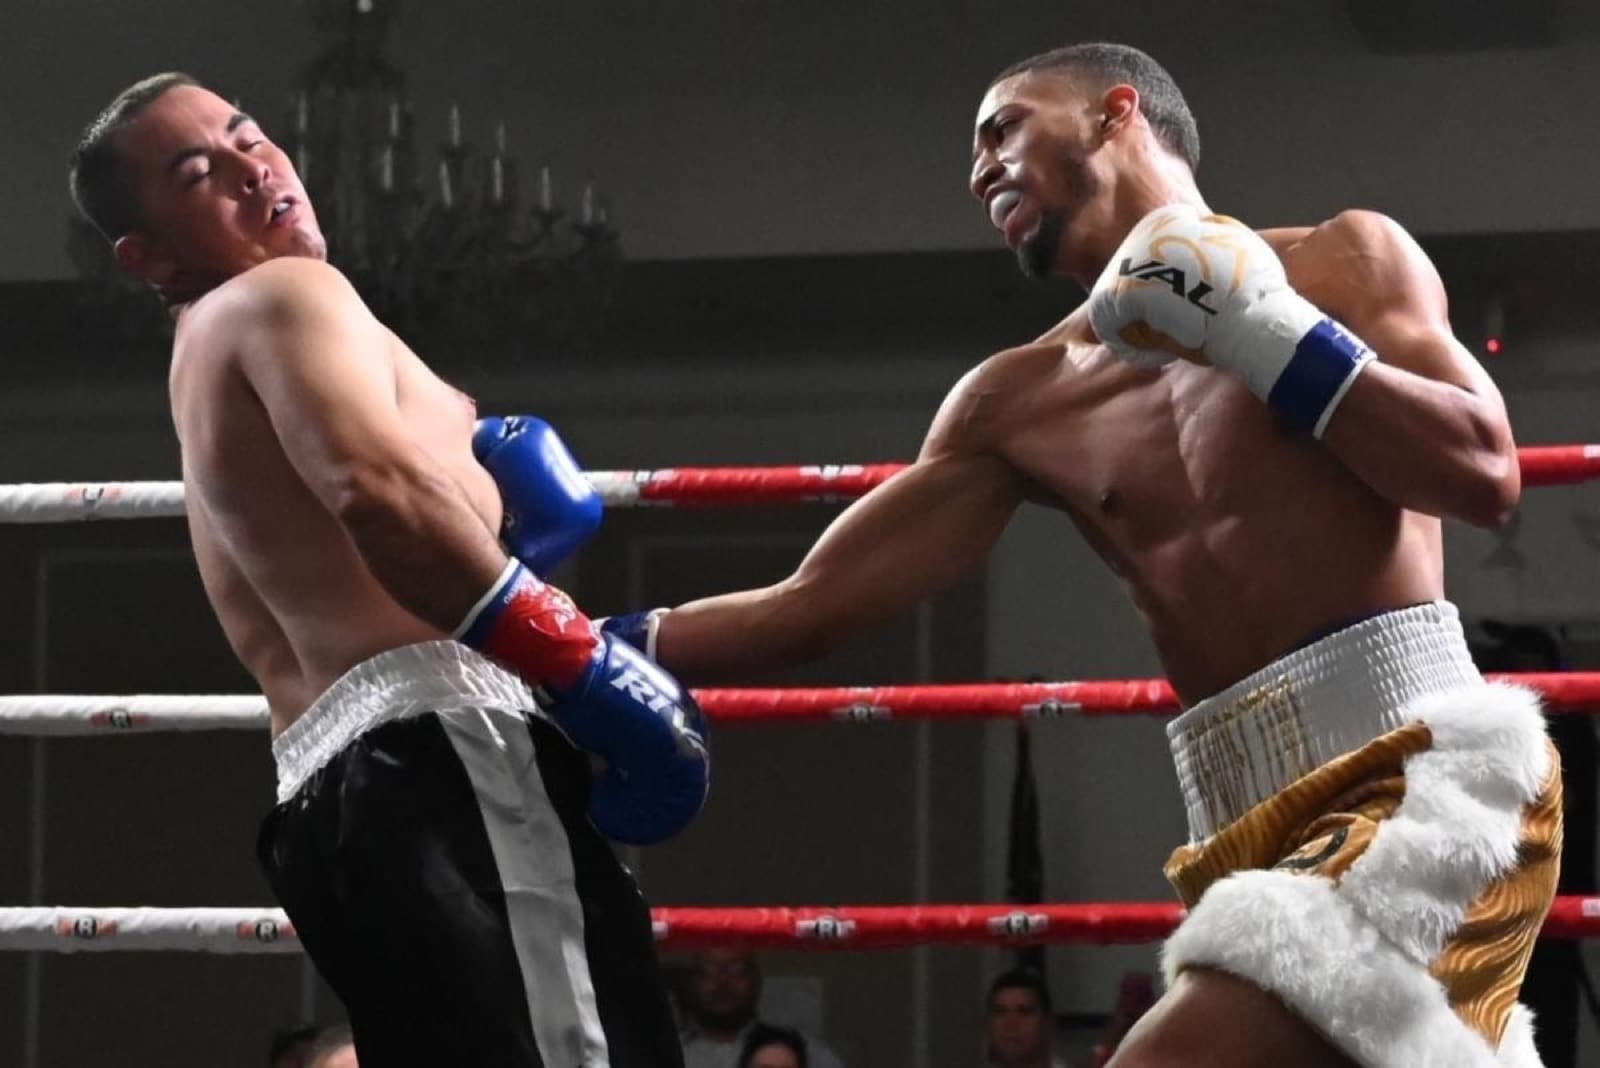 Jeffrey Torres and Denzel Whitley Score Dominating Knockout Victories